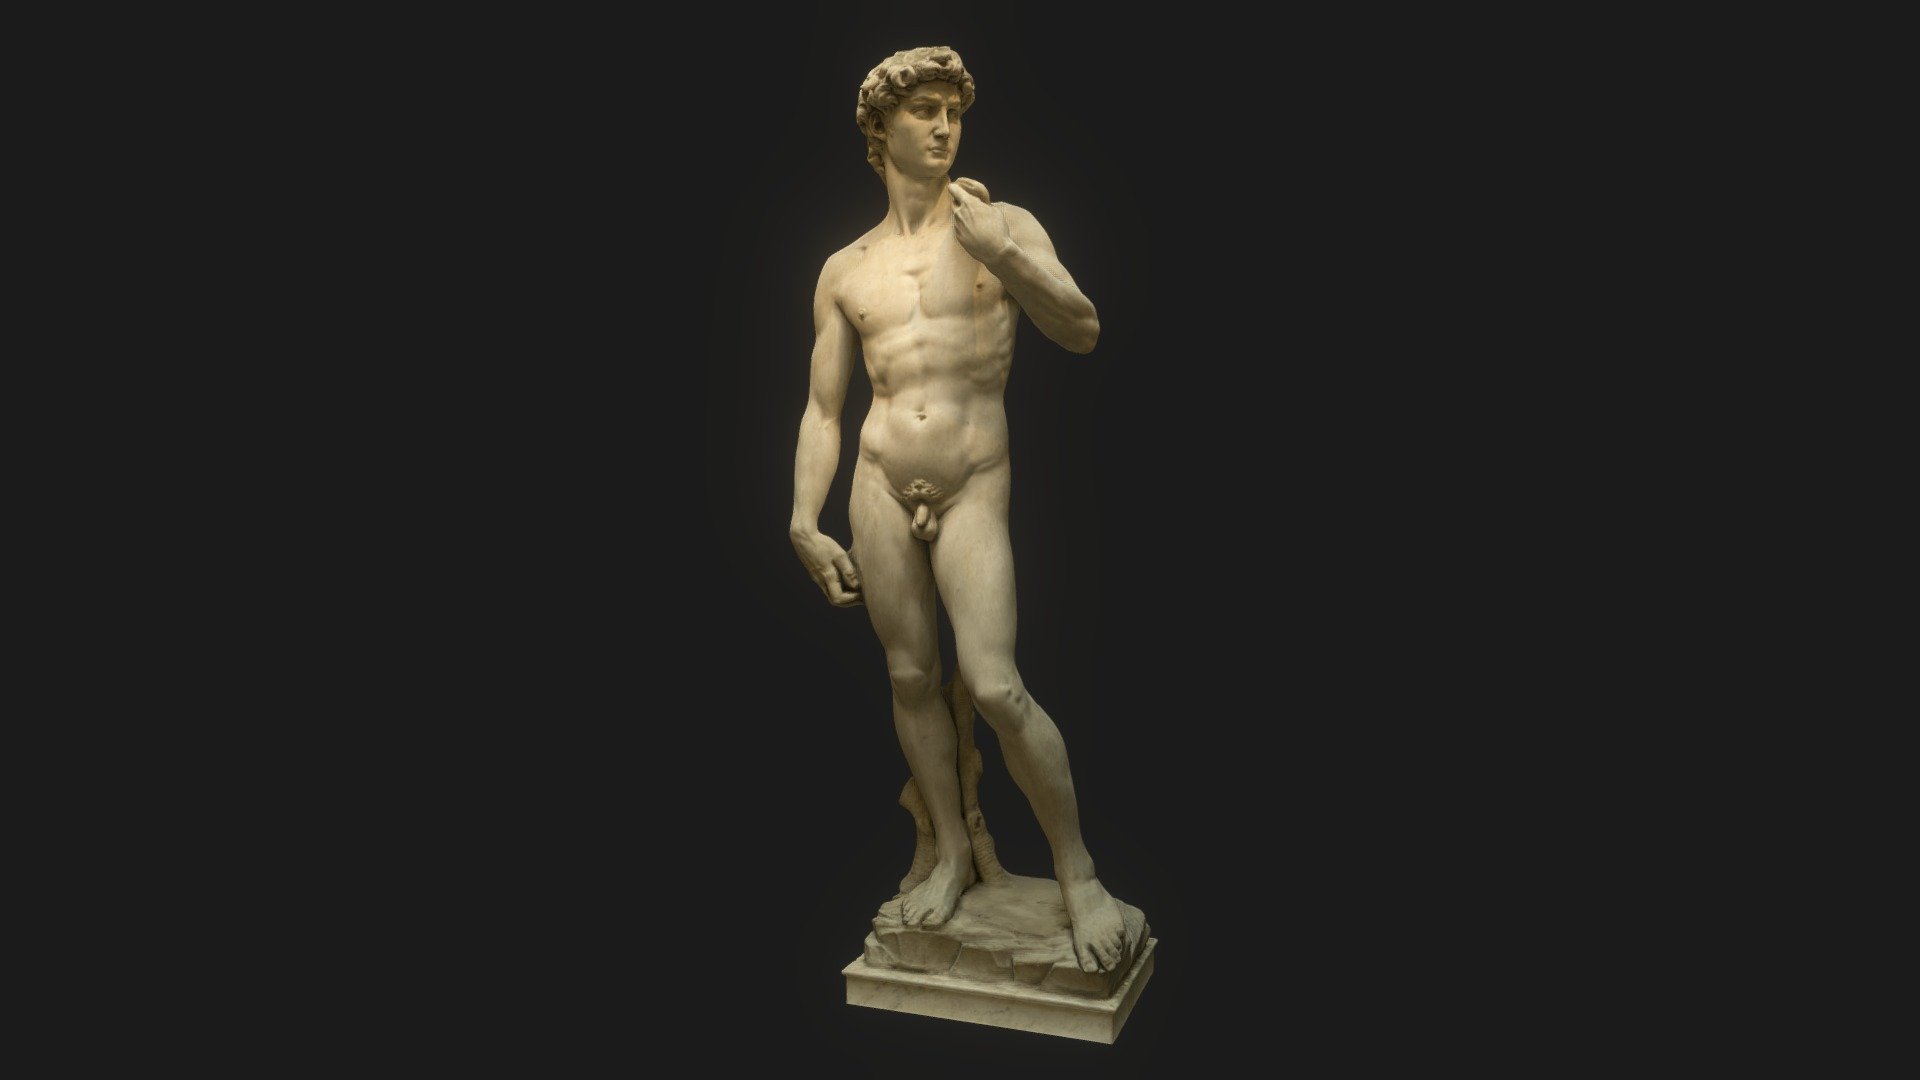 David by Michelangelo, 1501–1504,  Galleria dell'Accademia, Florence, Italy.

Made with Reality Capture, and some detailing with Zbrush, Maya and Photoshop.
*The top of the head and shoulder was reconstructed as it was imposibble to photograph

Send an email if you wanna use this model for anything non-profit to EternalEchoesVR@gmail.com - David - 3D model by EternalEchoesVR 3d model